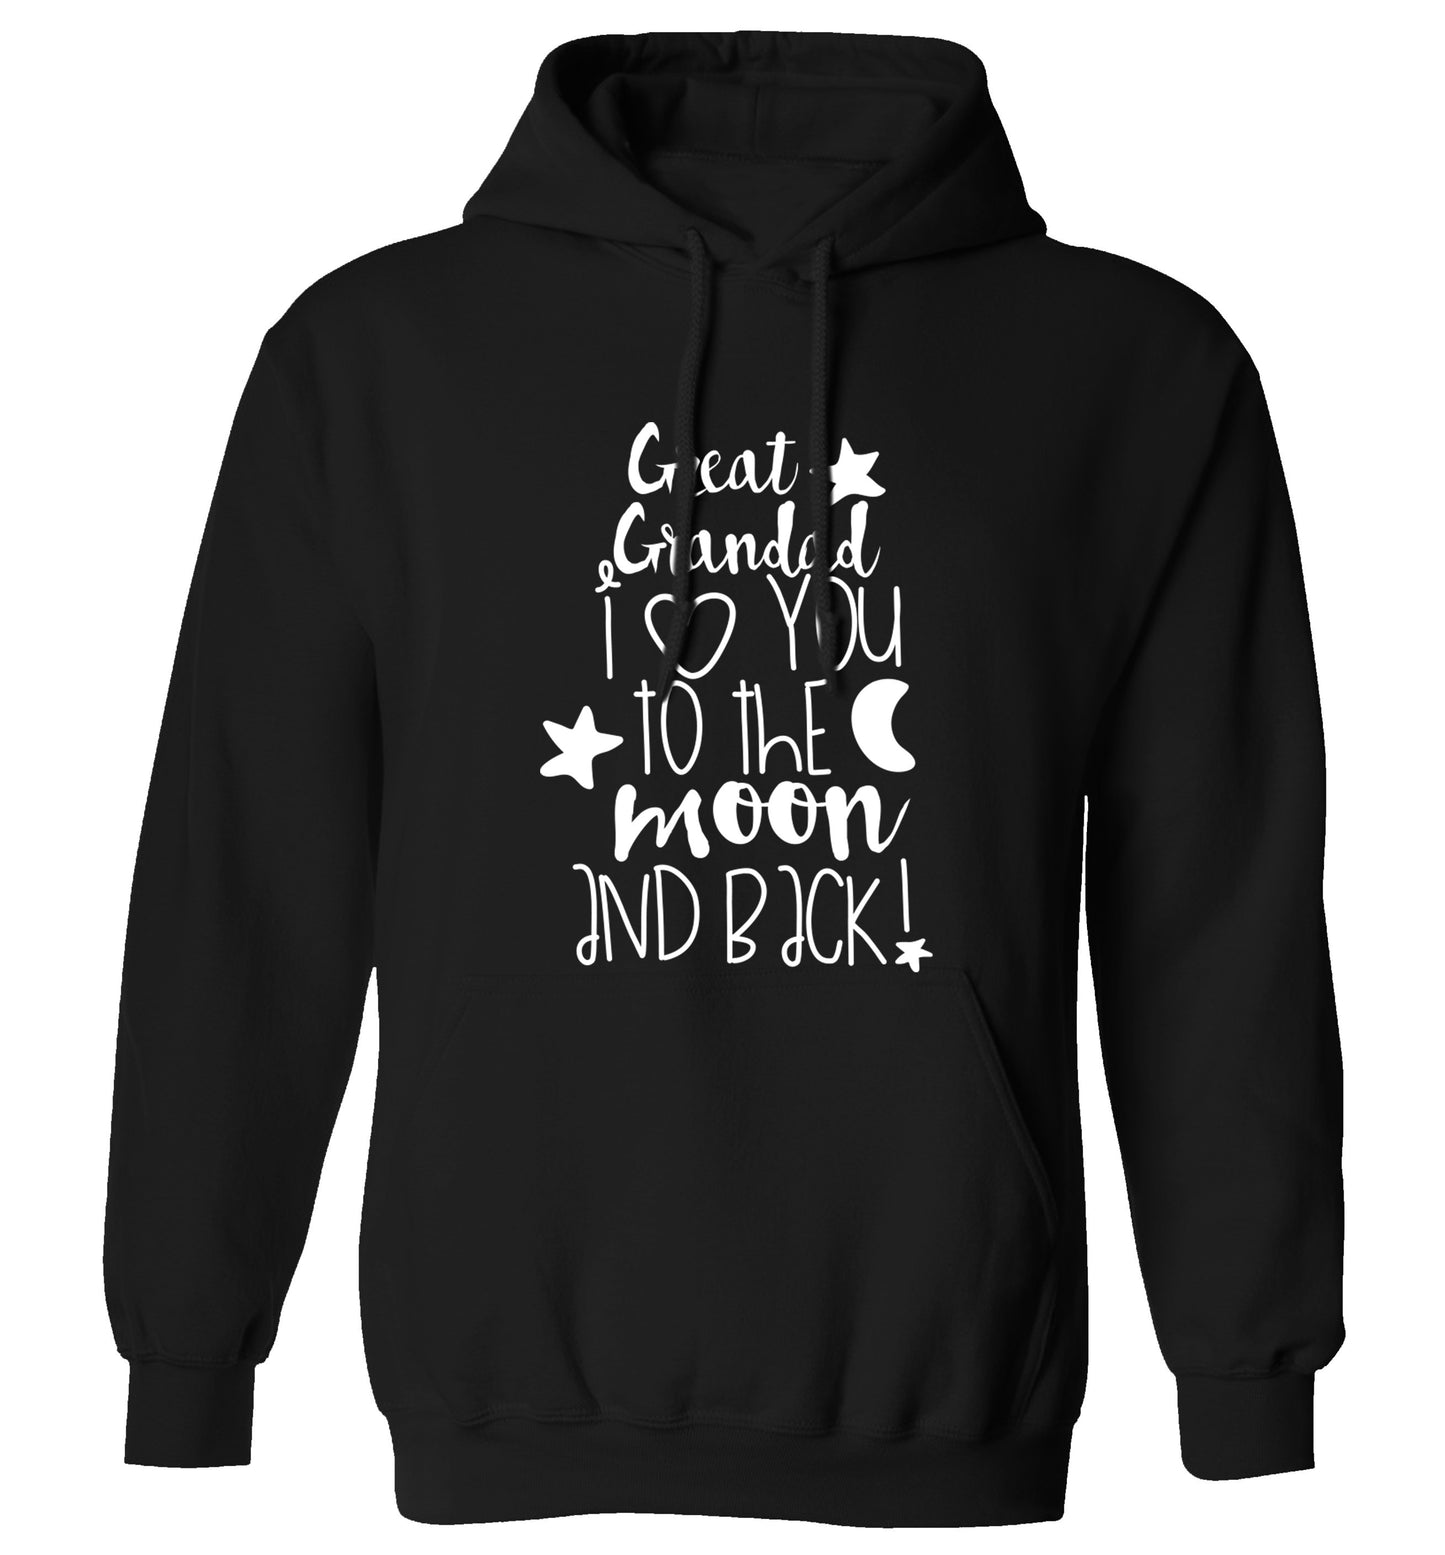 Great Grandad I love you to the moon and back adults unisex black hoodie 2XL